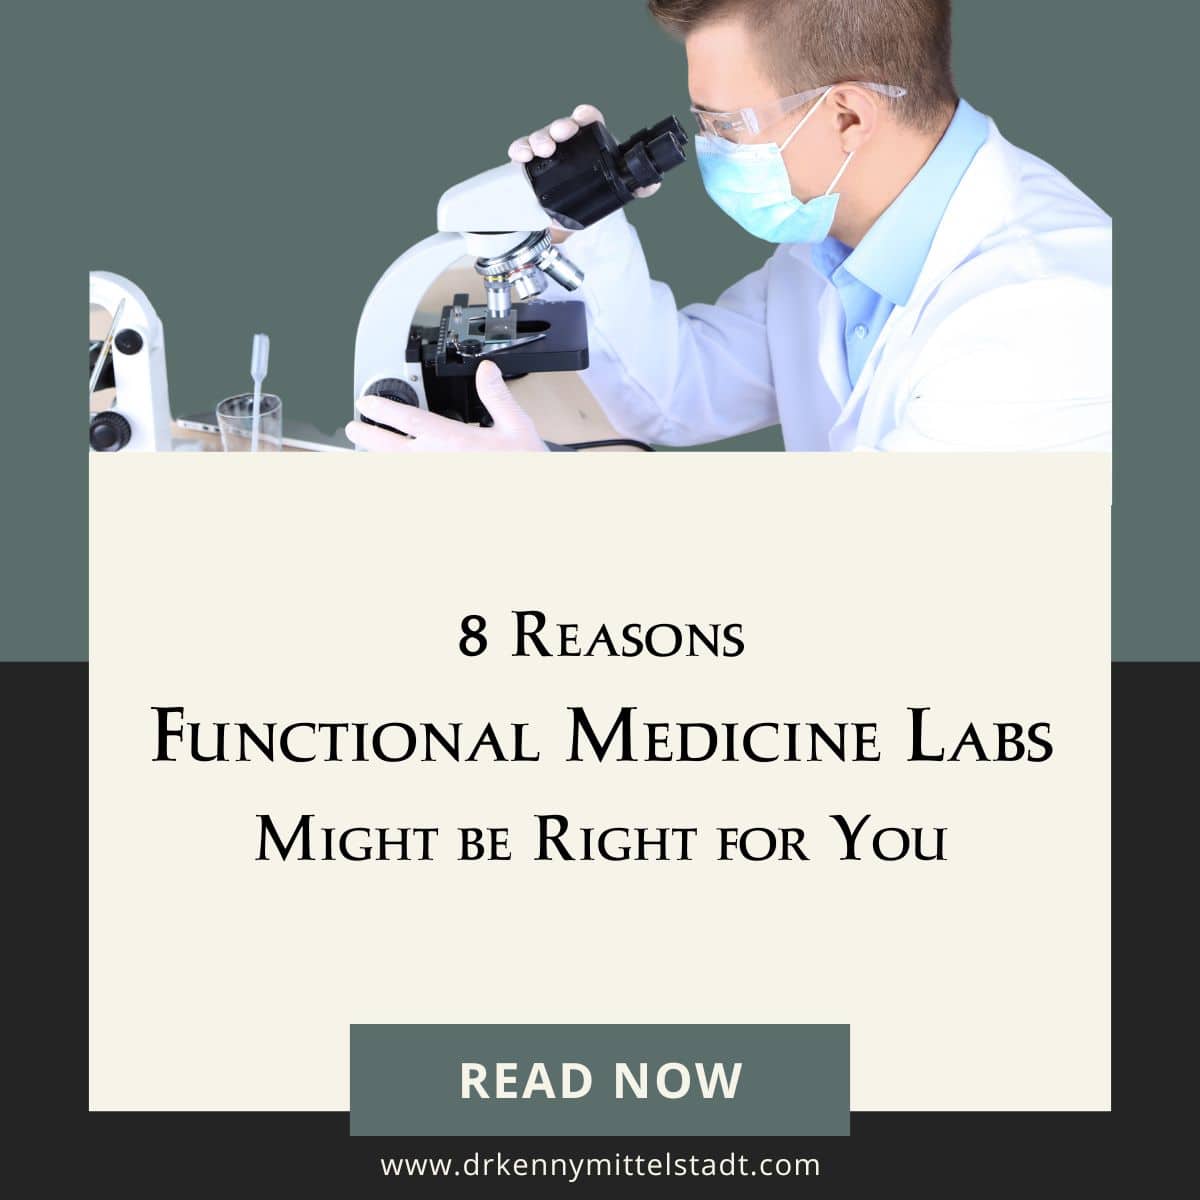 This is a photo of a laboratory technician viewing a lab sample through a microscope with the title of the blog post, "8 Reasons Functional Medicine Labs Might be Right for You."